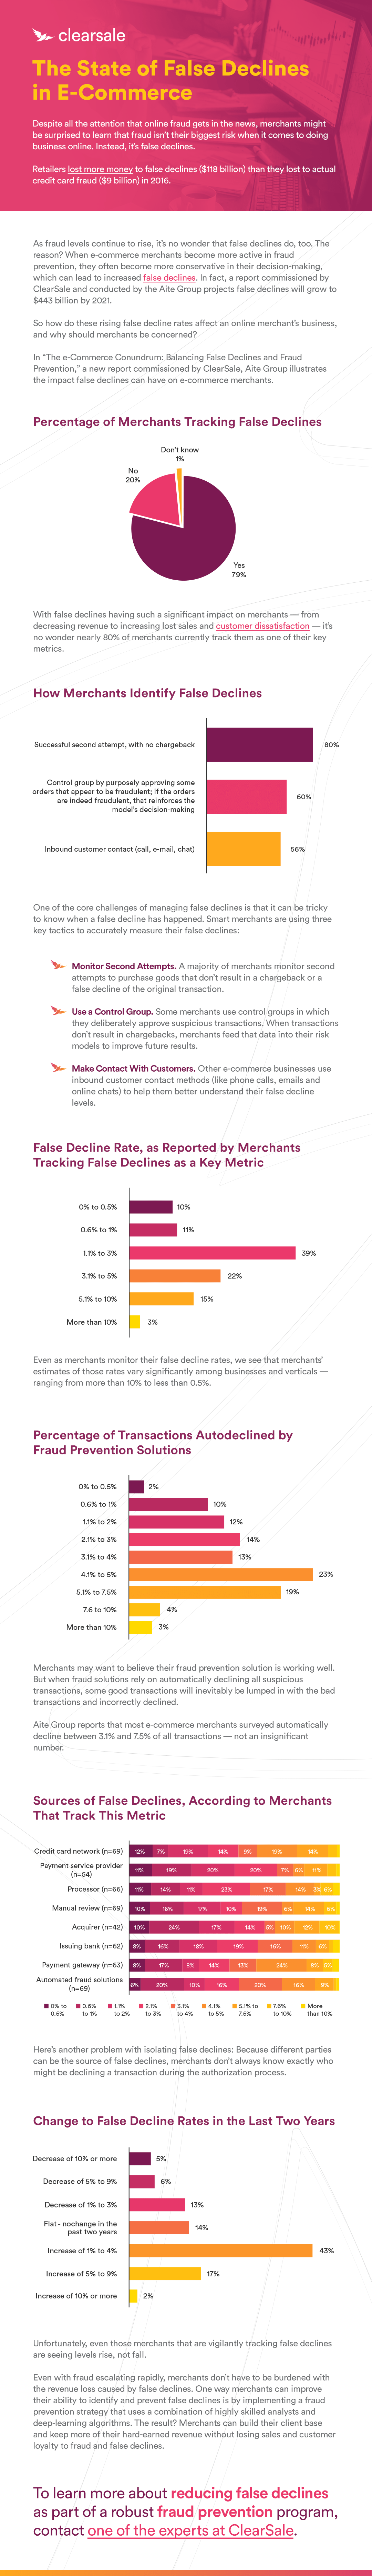 Infographic_-_The_State_of_False_Declines_in_E-Commerce_v1